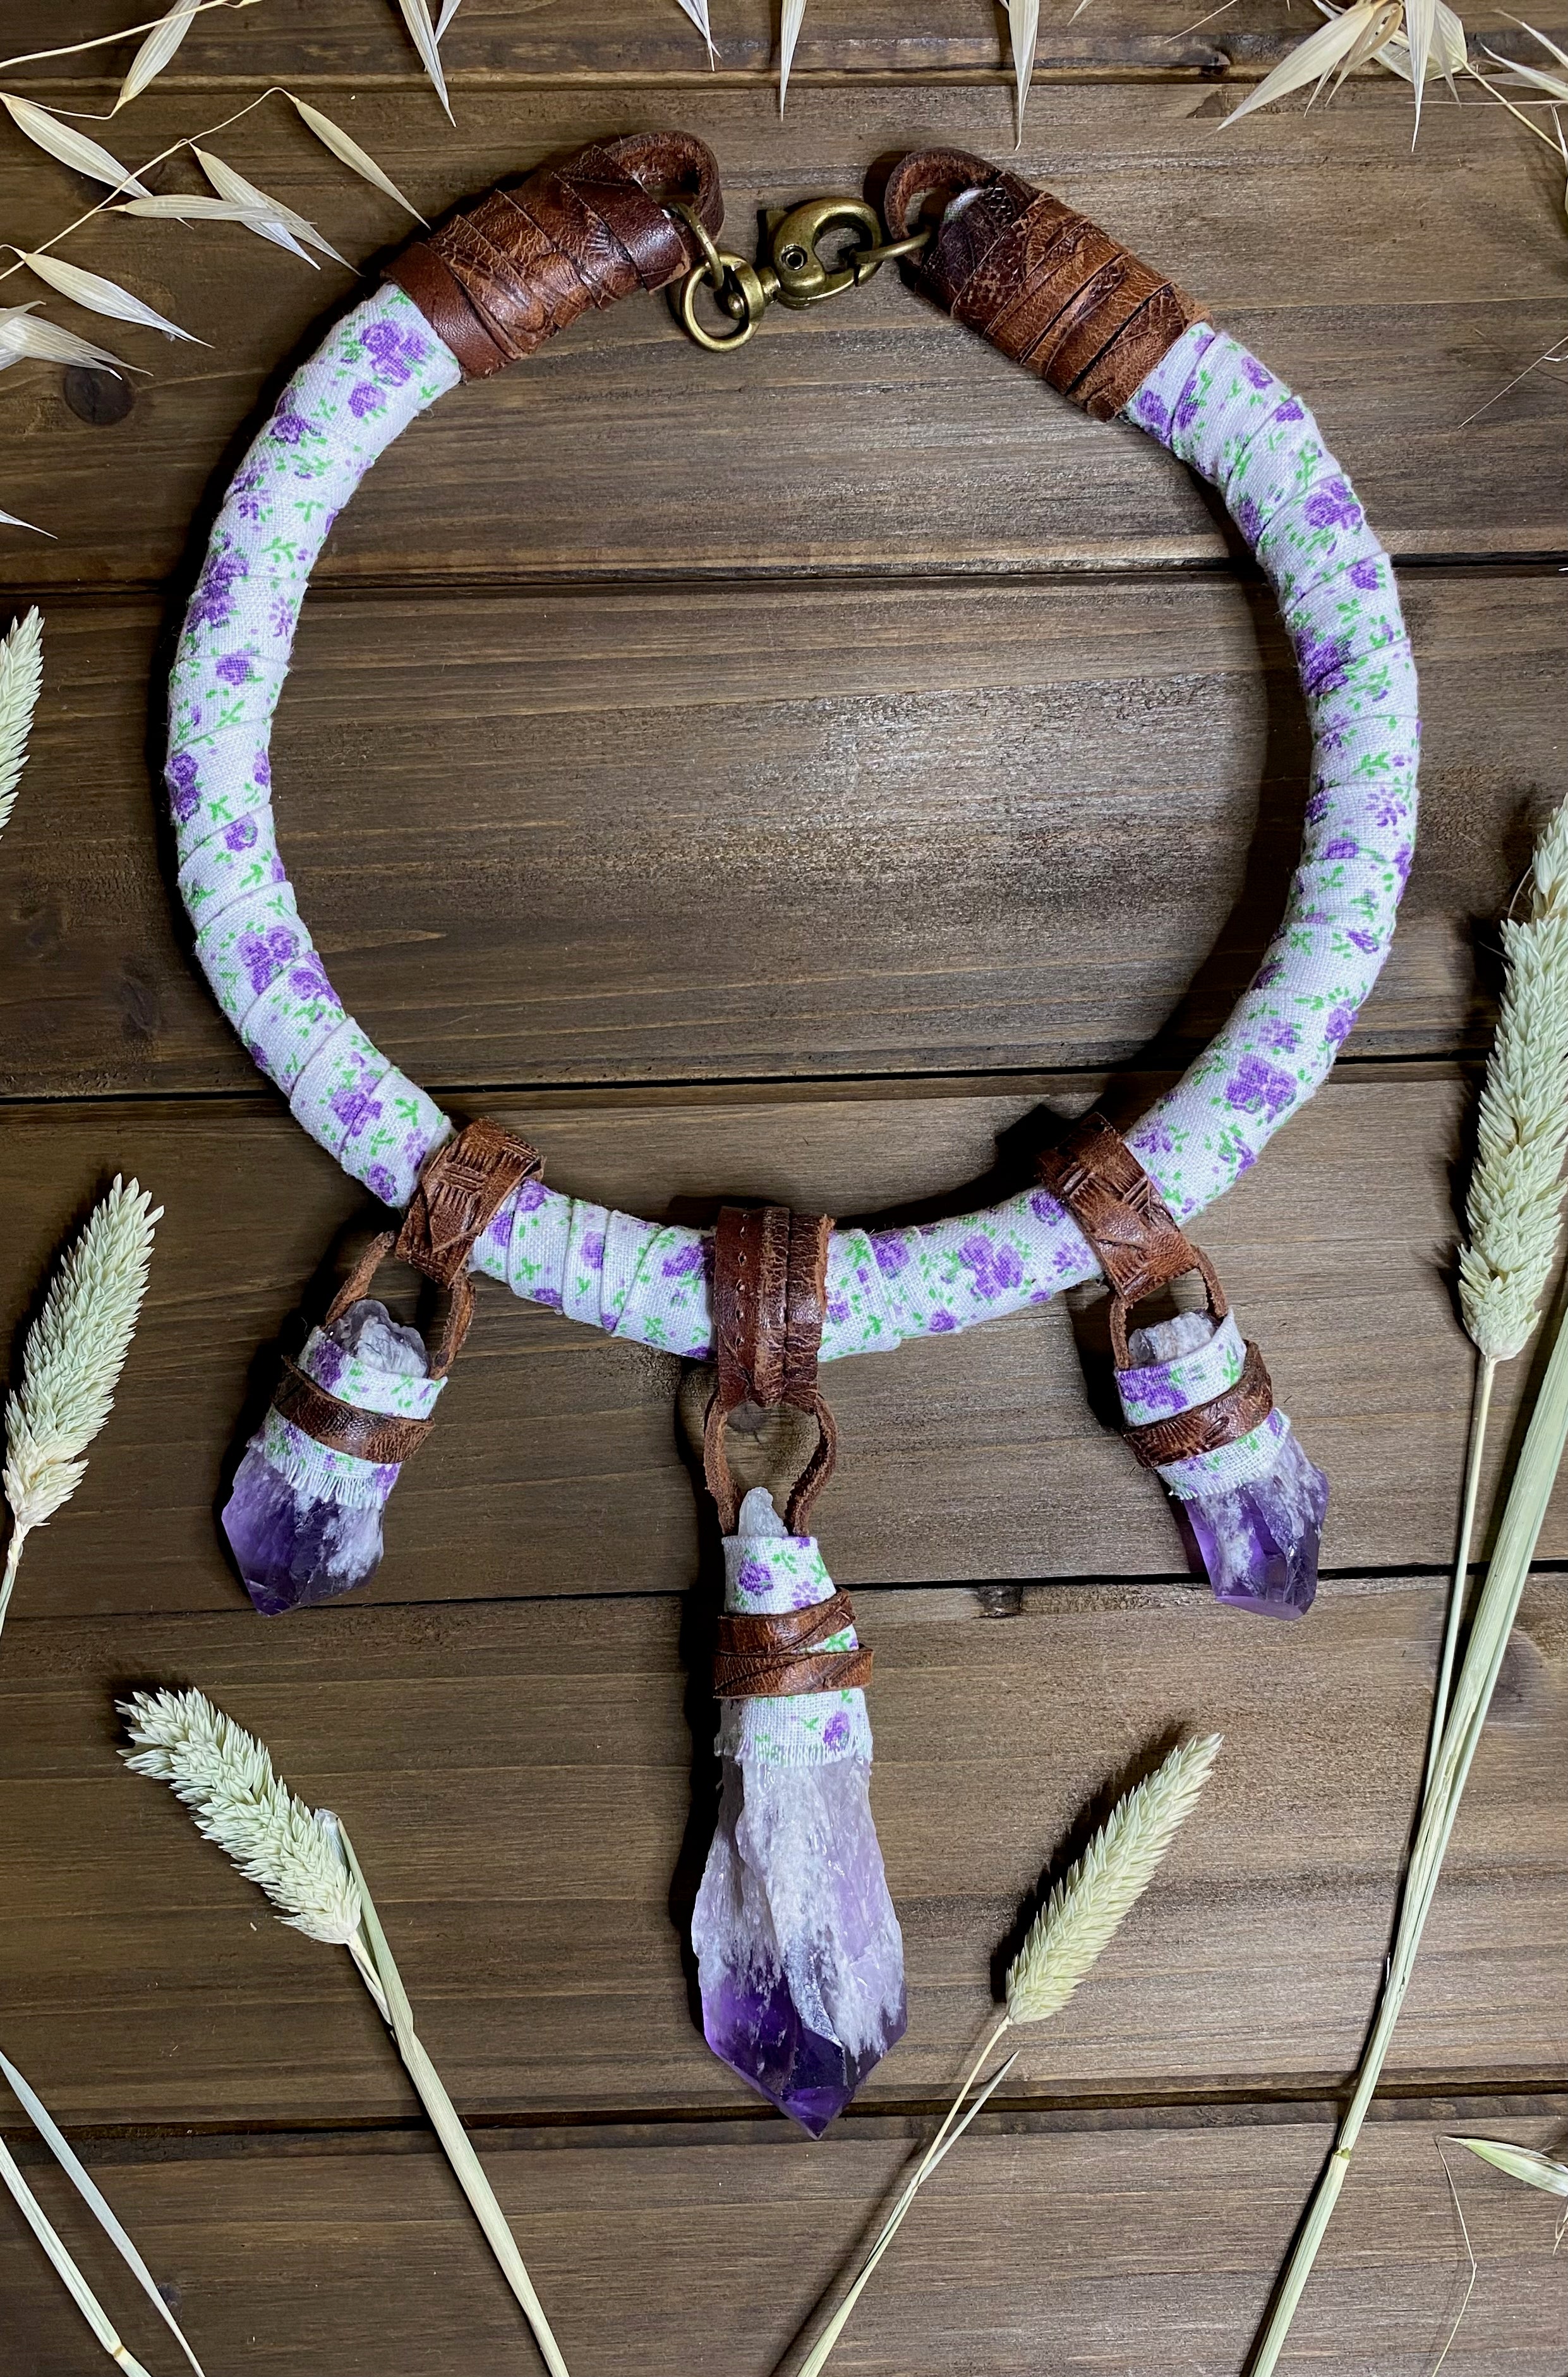 Crystals on the Prairie: Amethyst Spears Necklace